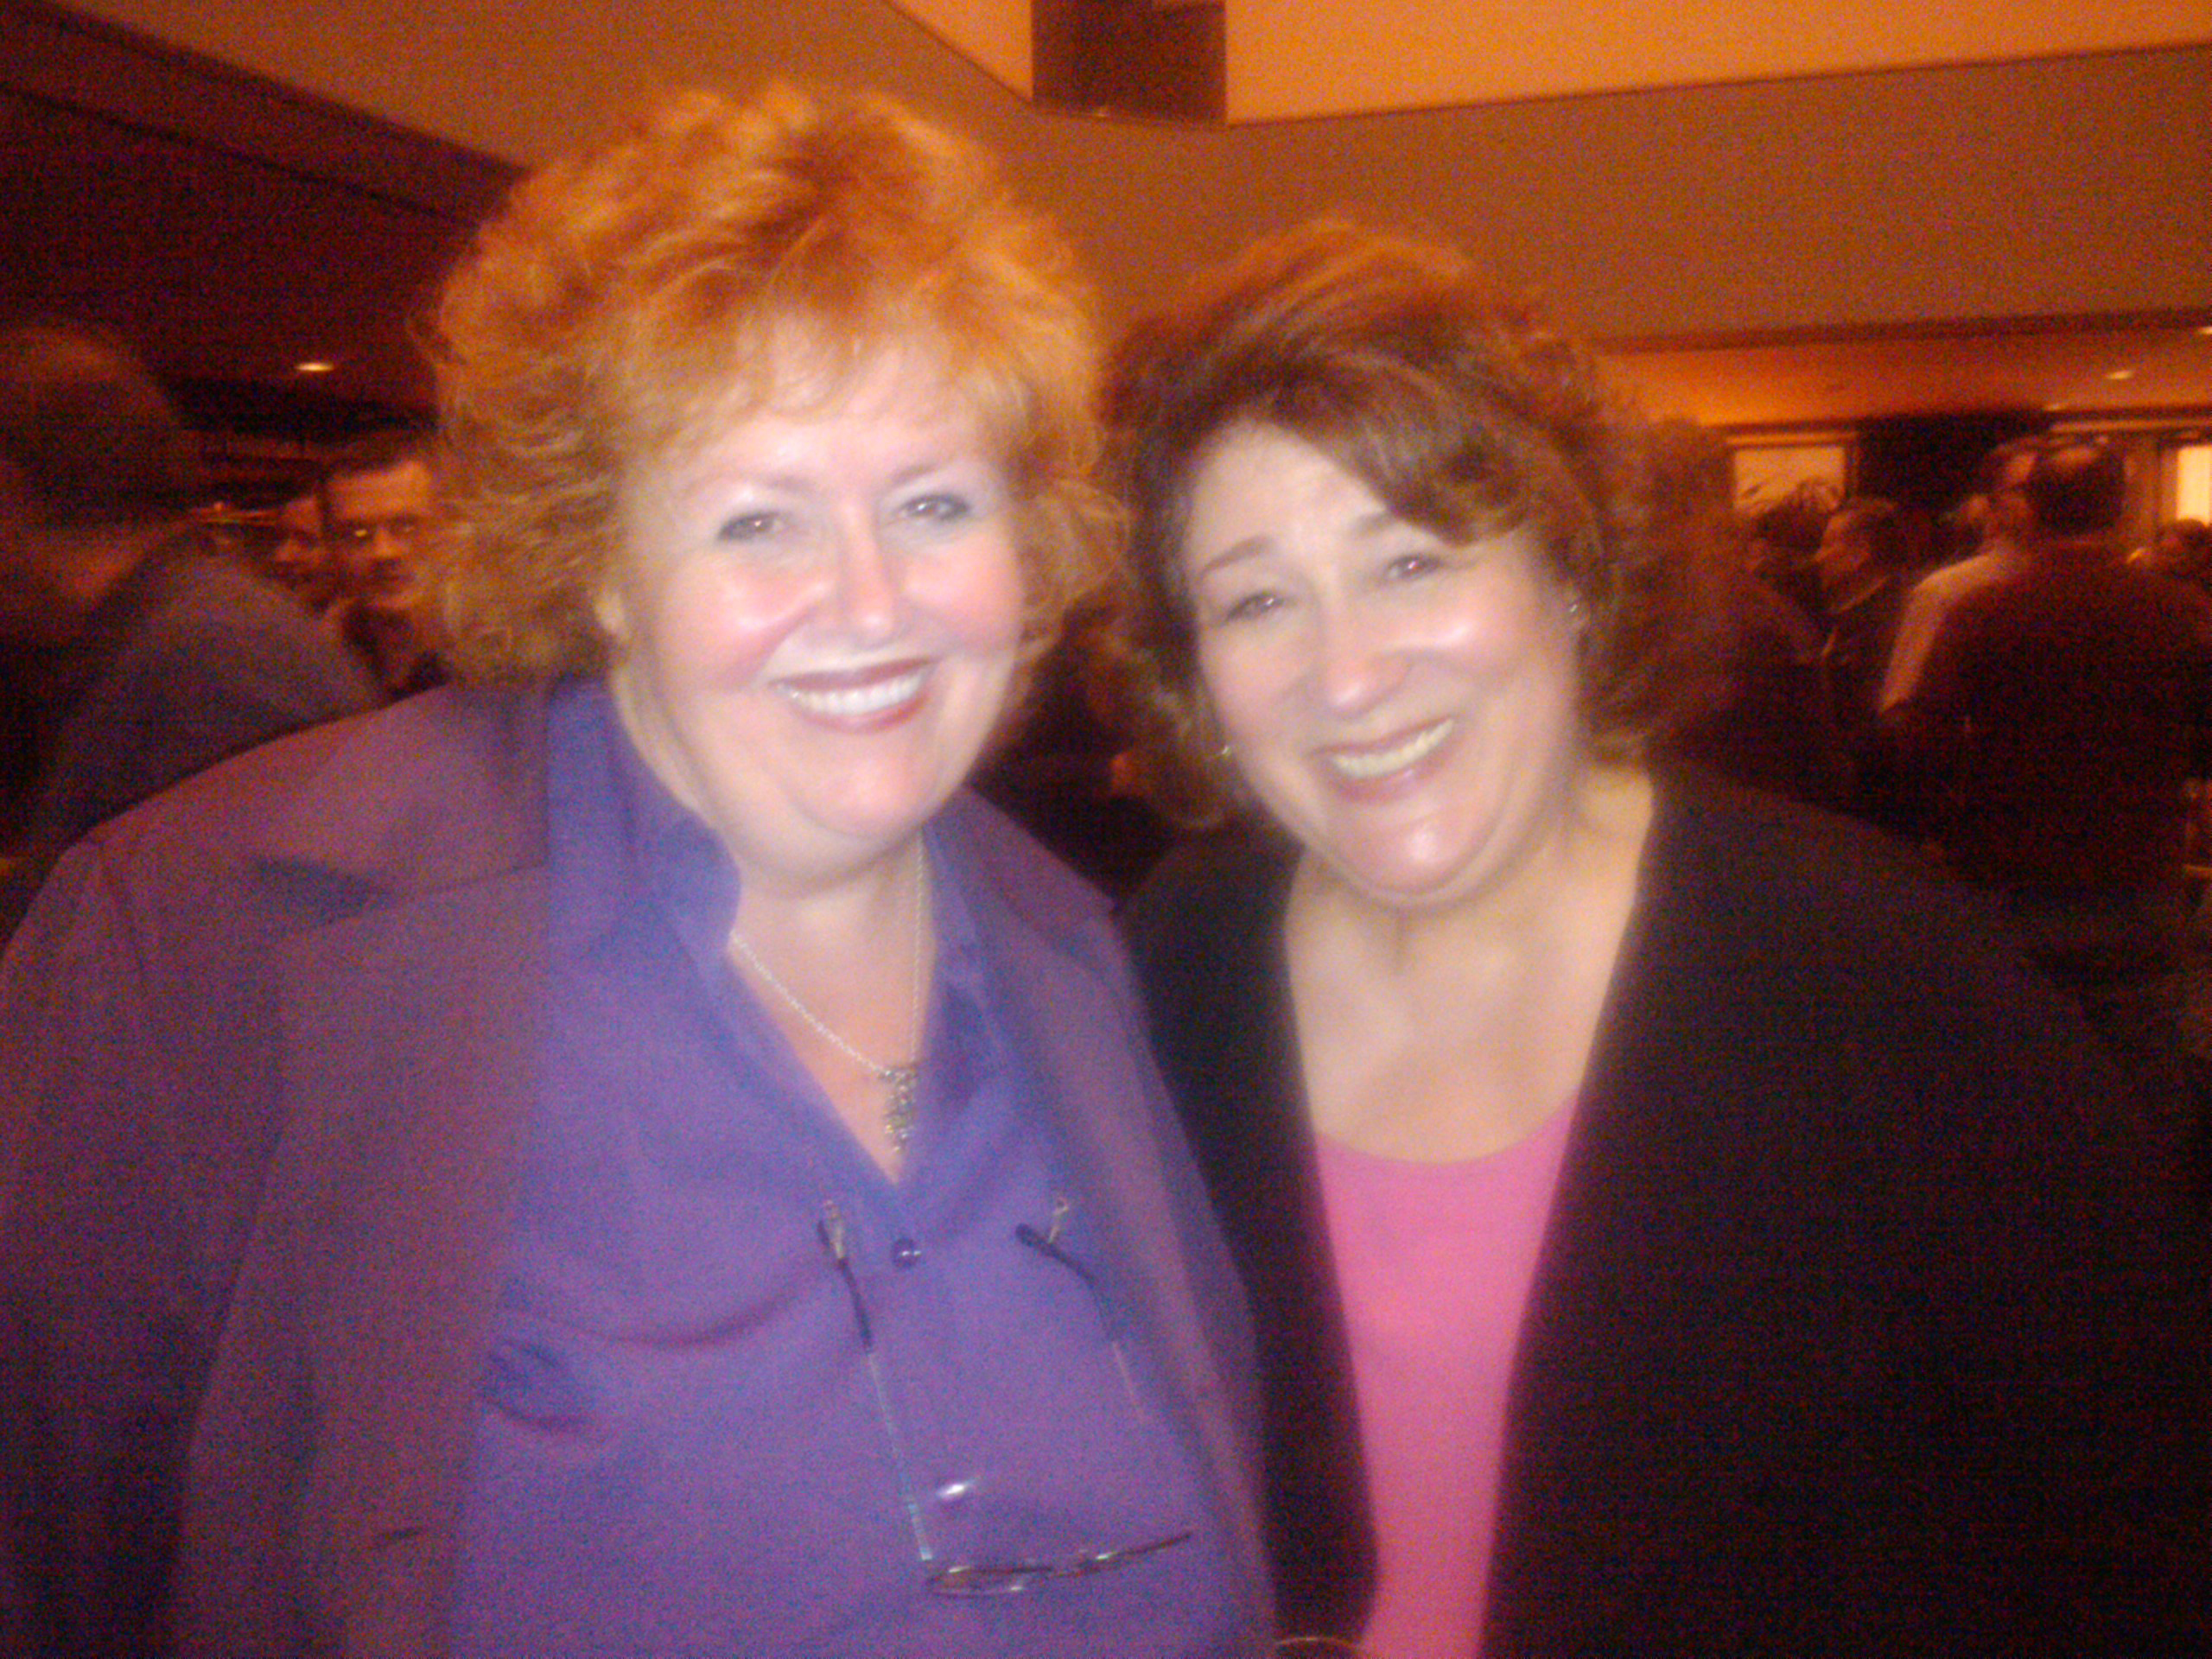 Tracy Weisert & the delightful then soon-to-be Emmy winner Margo Martindale at the Television Academy May 24, 2011 in North Hollywood, CA